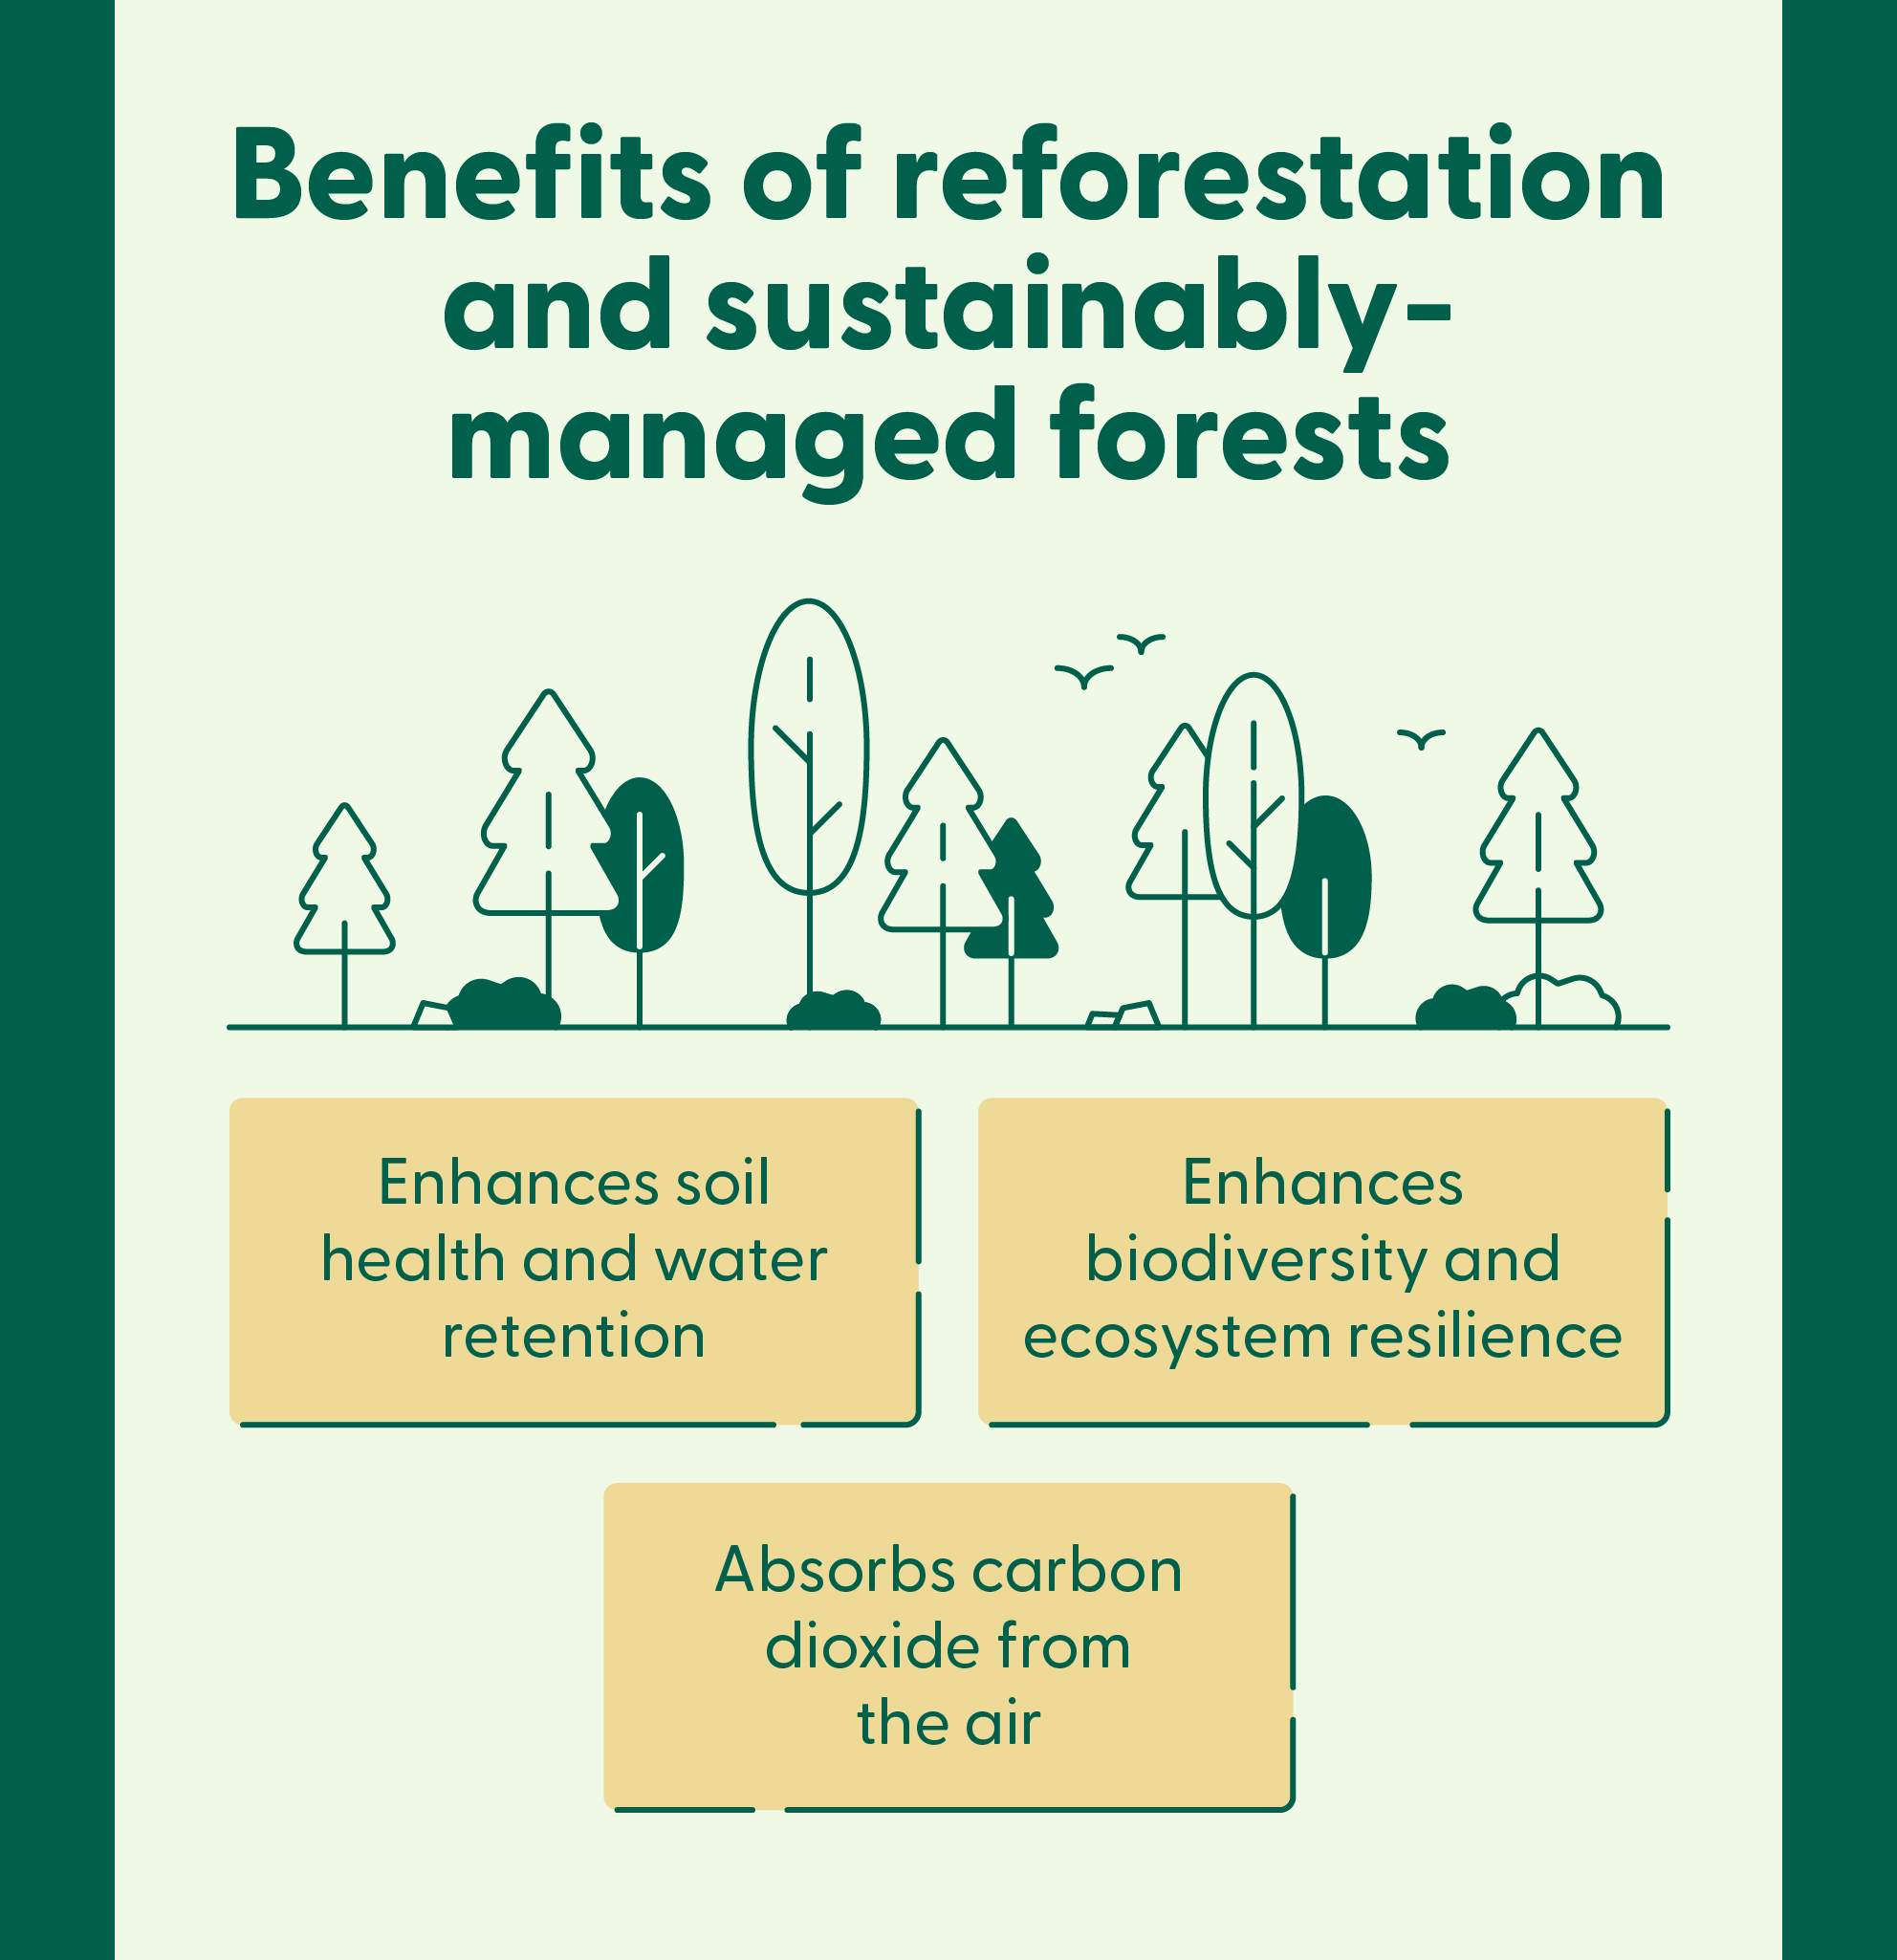 Illustrated trees accompany 3 benefits of reforestation and sustainably managed forests for climate change.